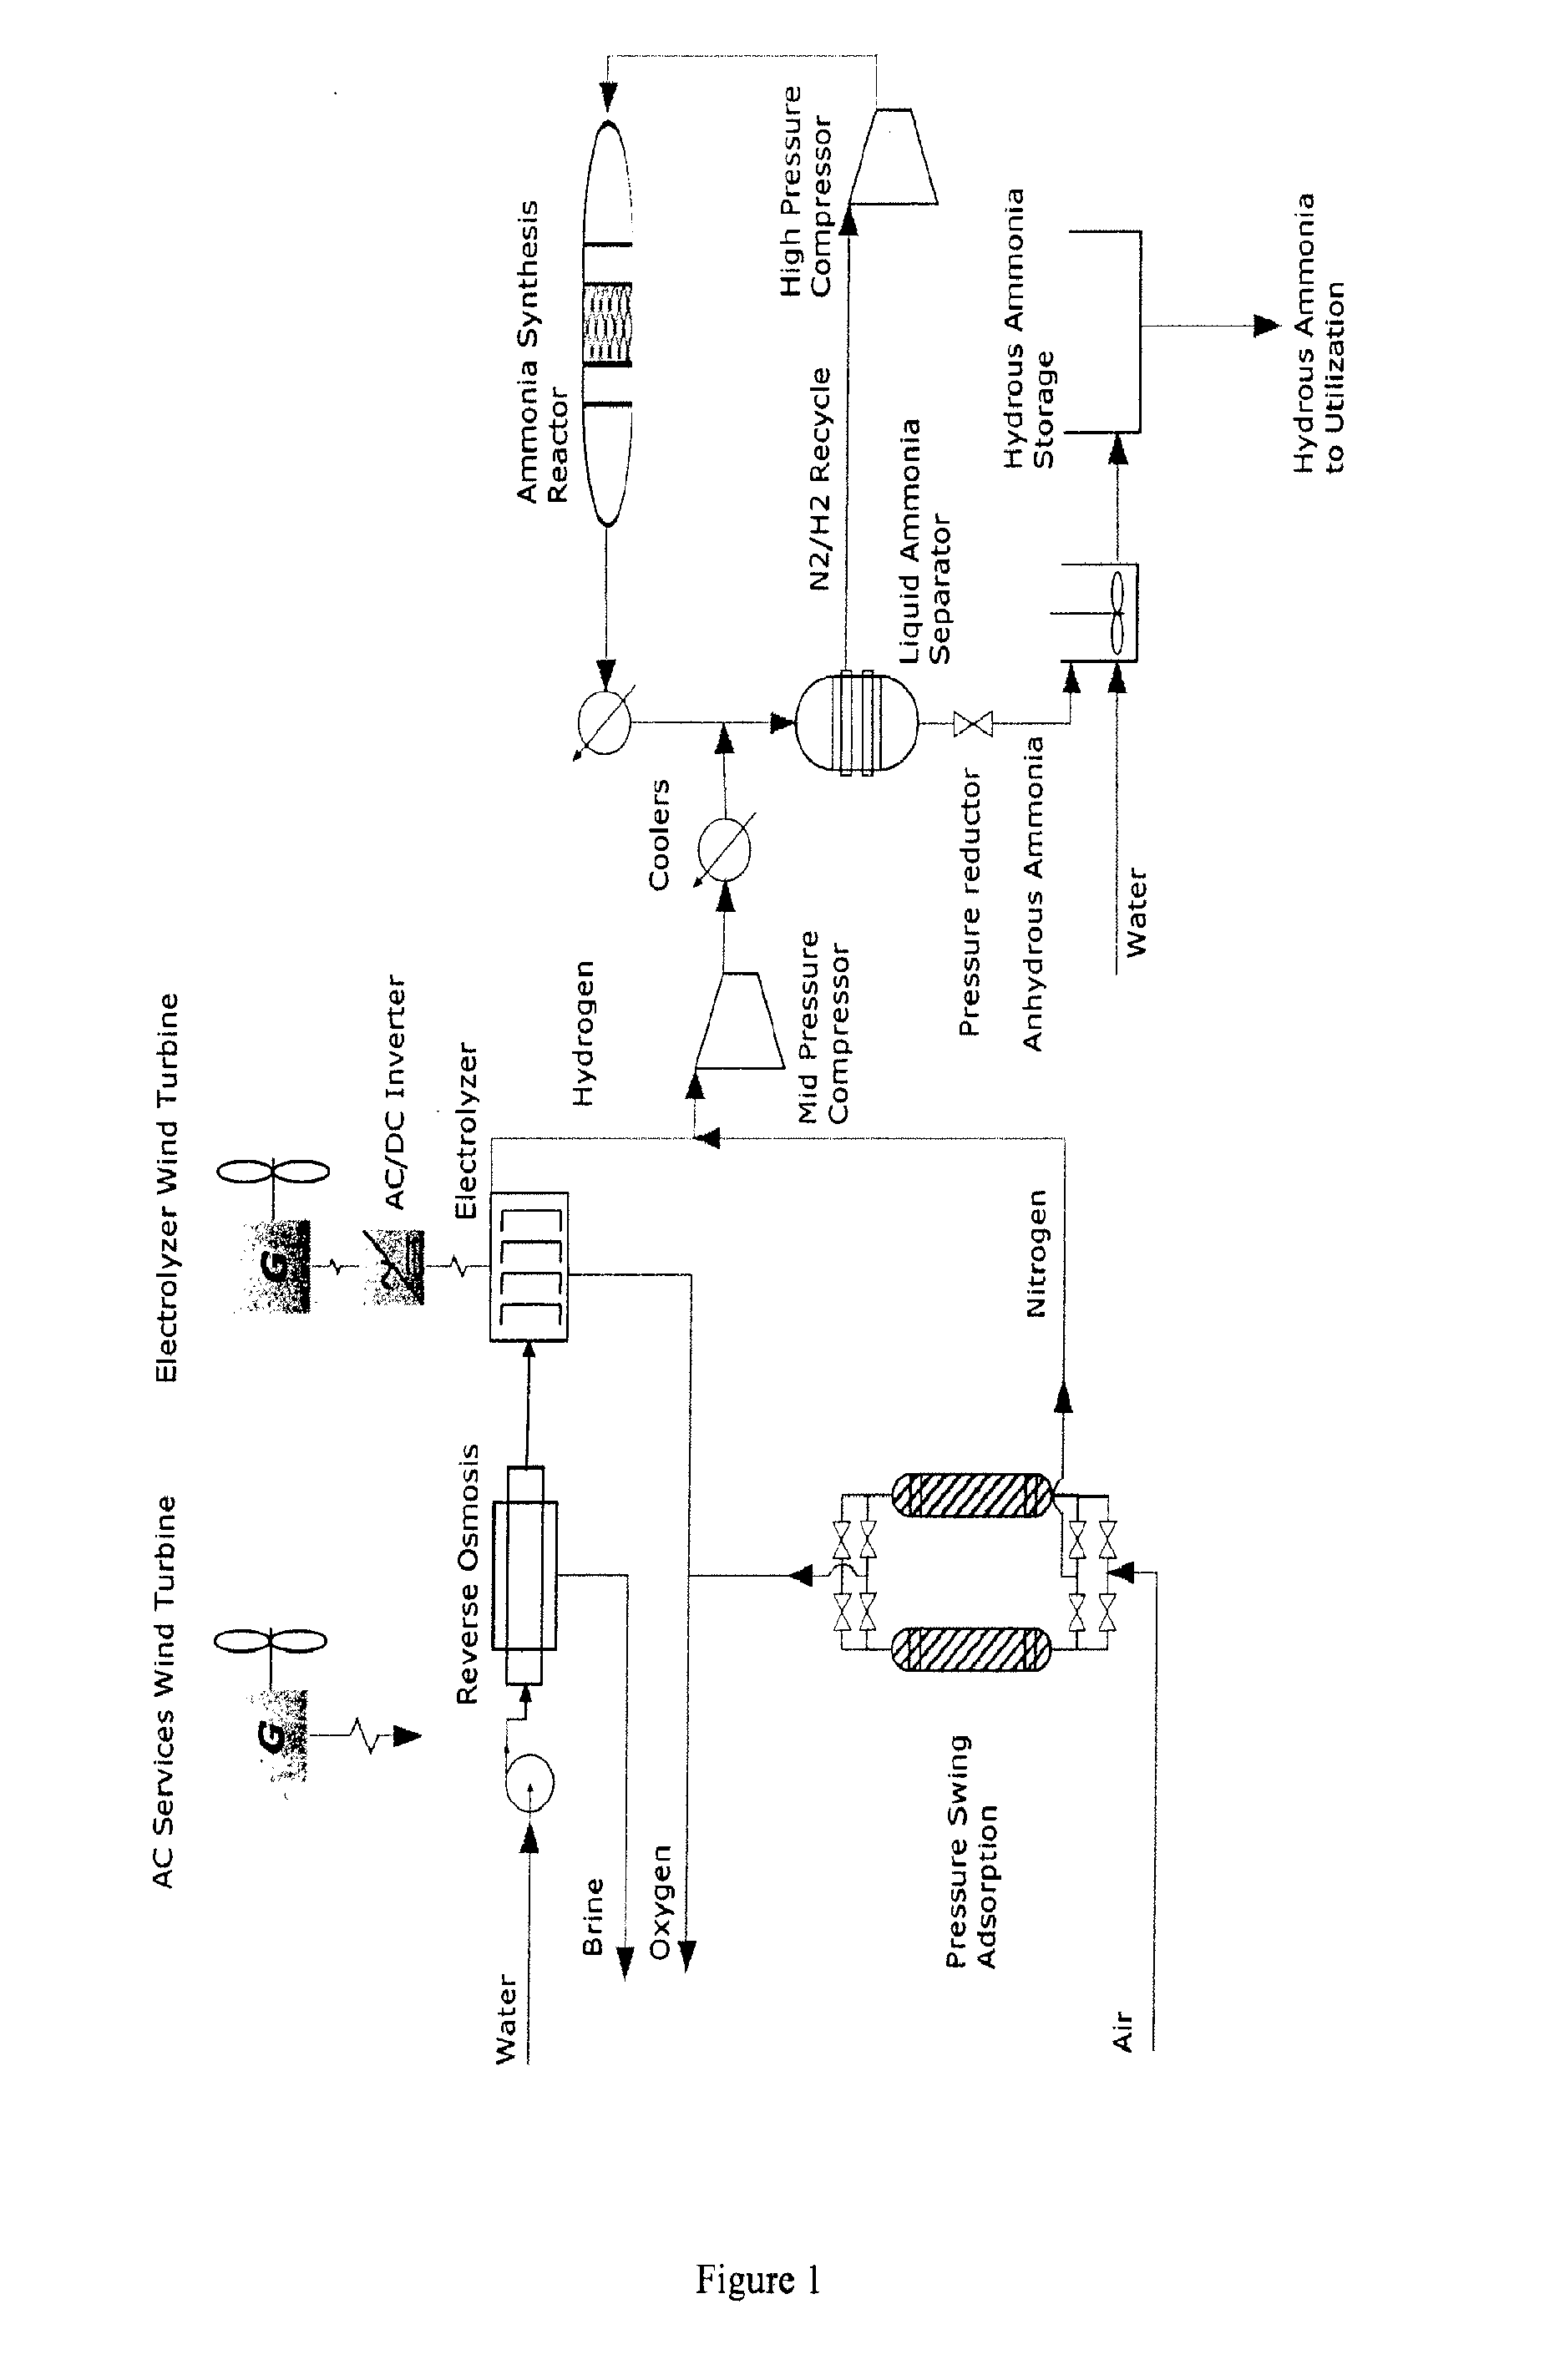 Systems and methods for producing ammonia fertilizer